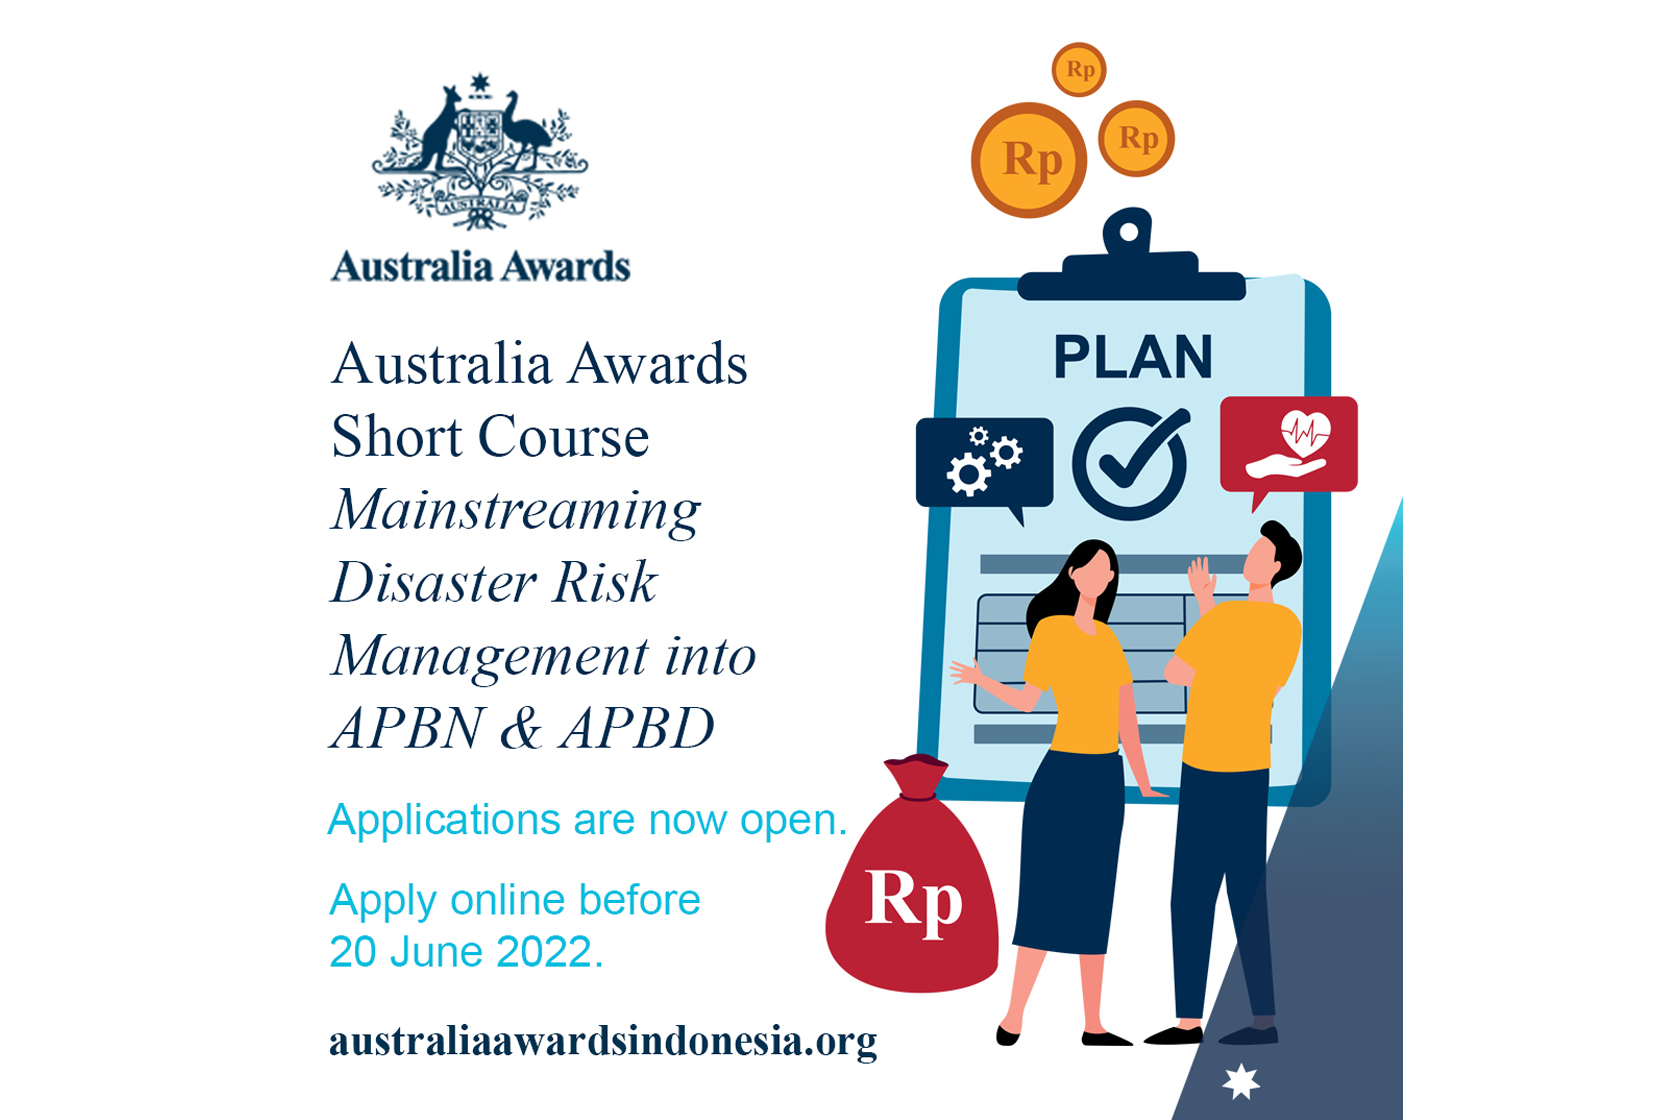 Applications Open for the Australia Awards Short Course on Mainstreaming Disaster Risk Management into APBN & APBD